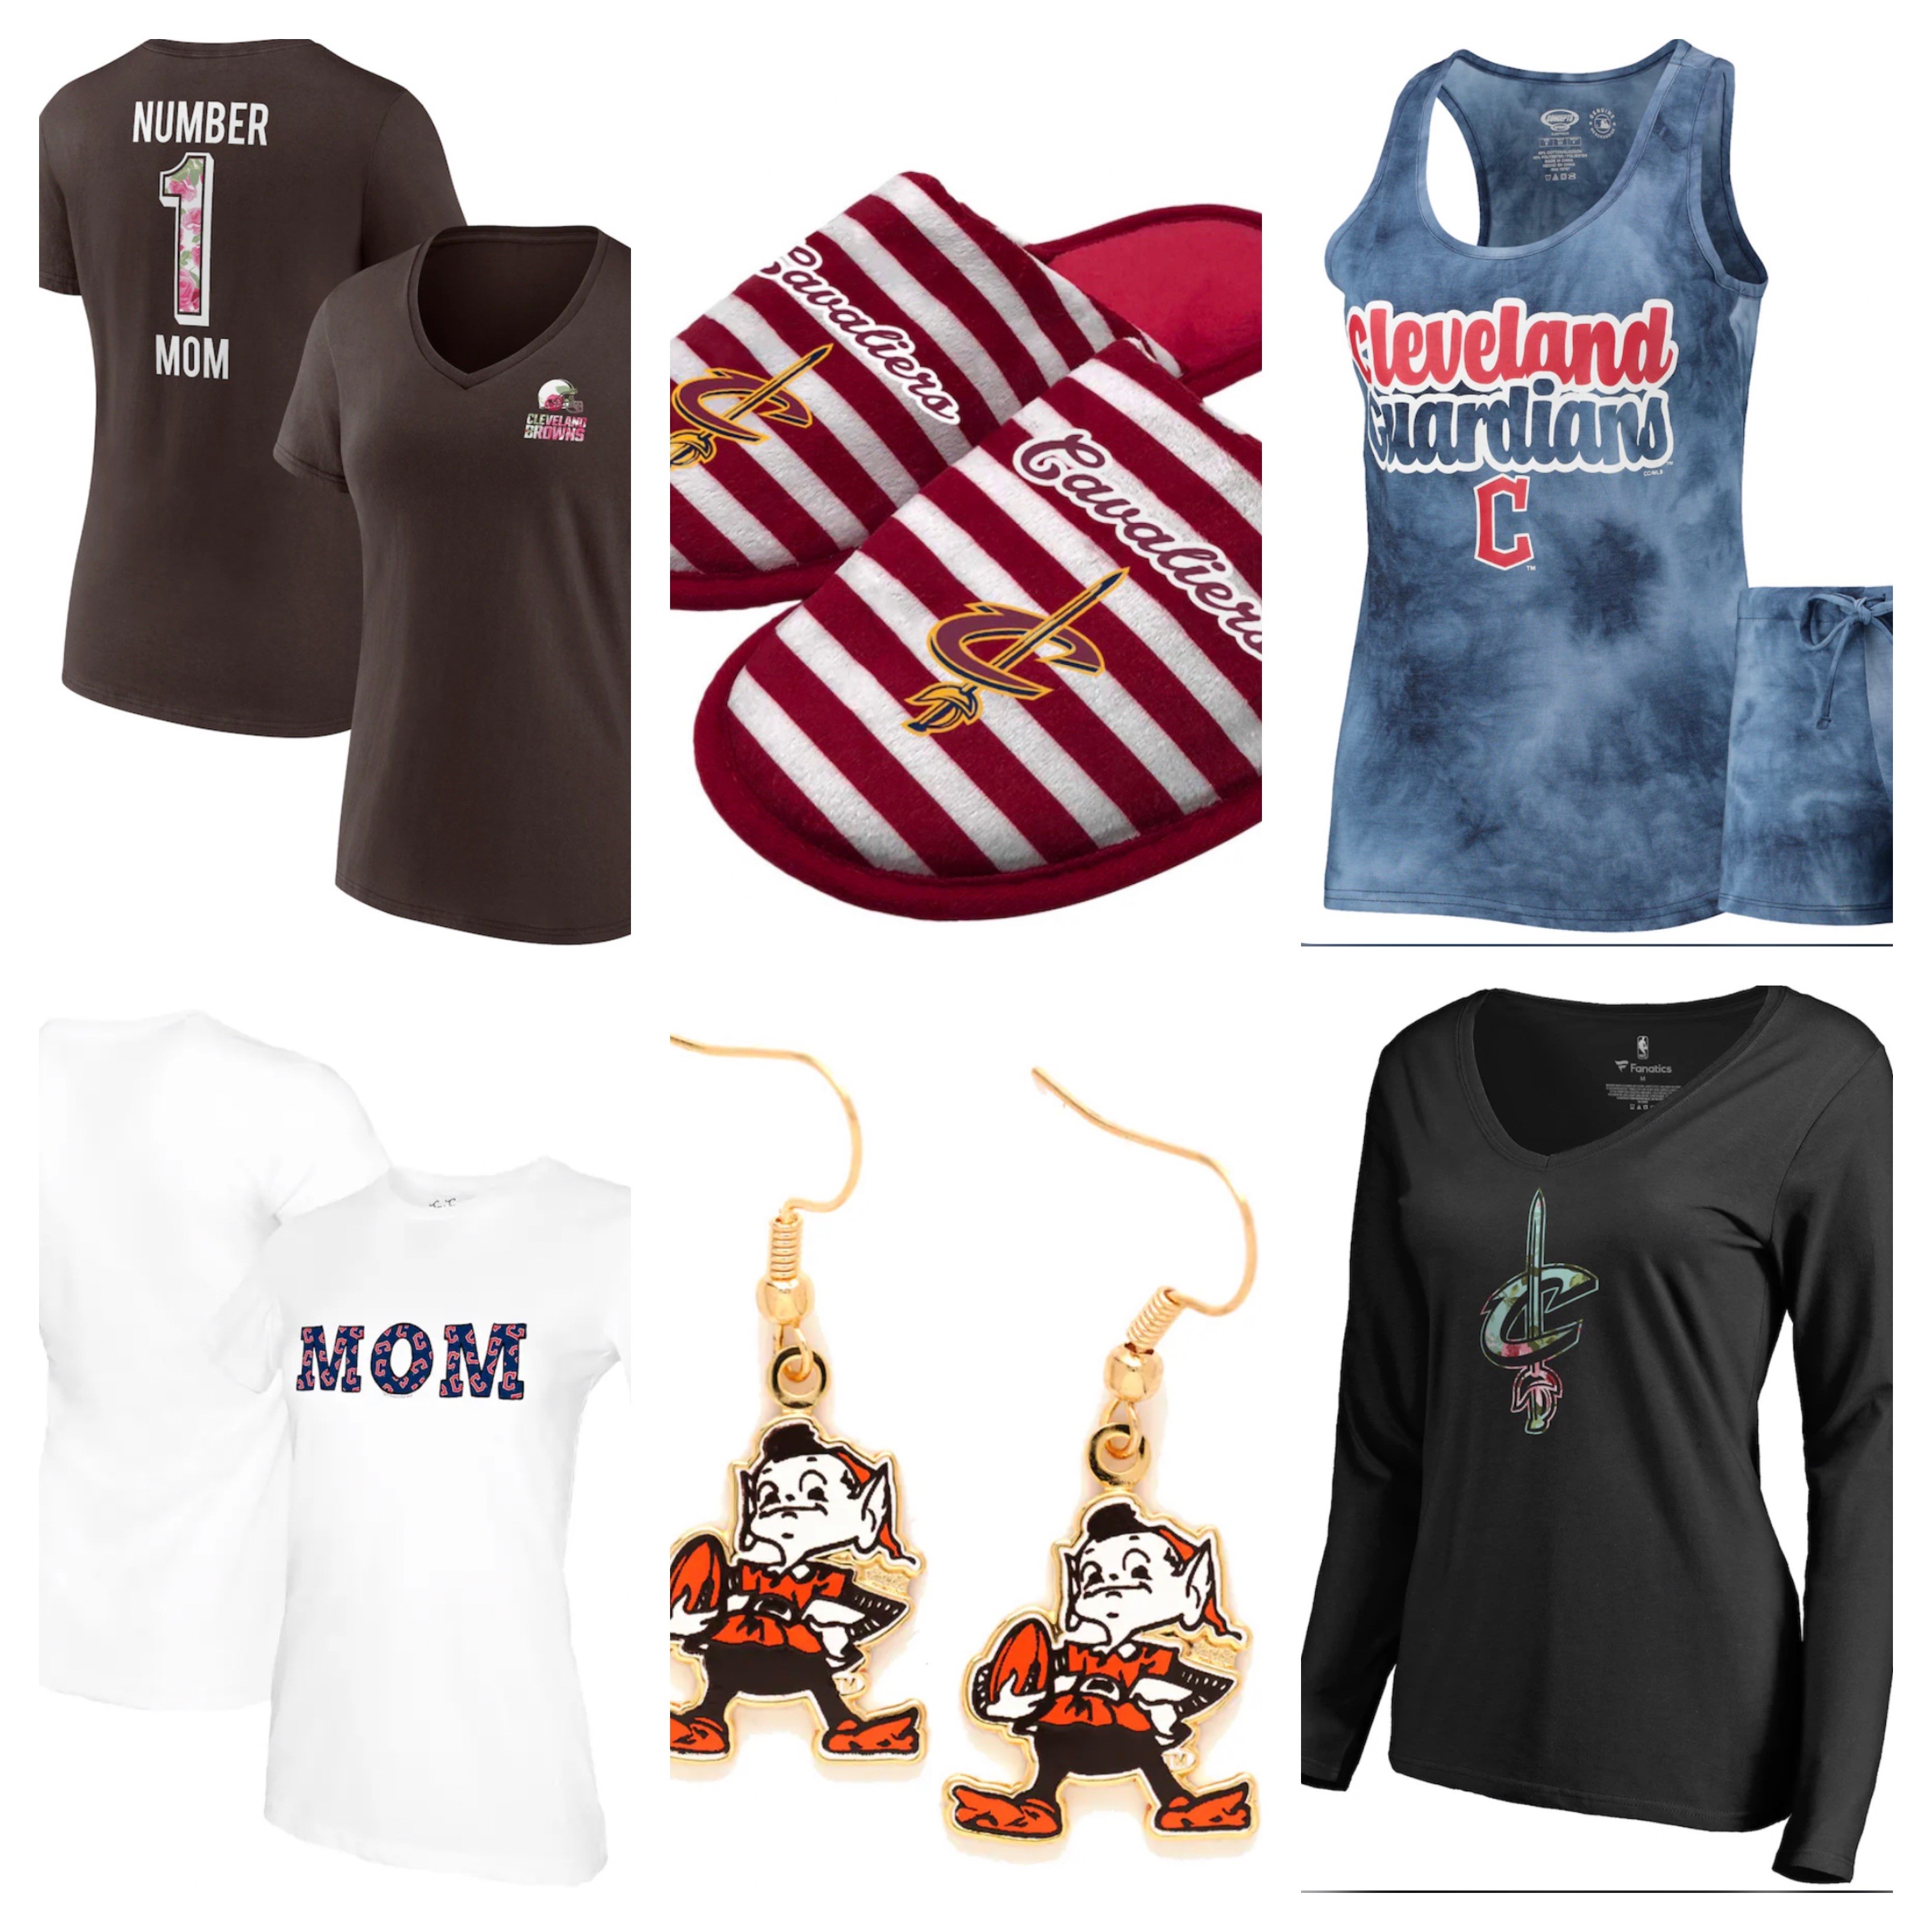 Cleveland Cavaliers Buying Guide, Gifts, Holiday Shopping